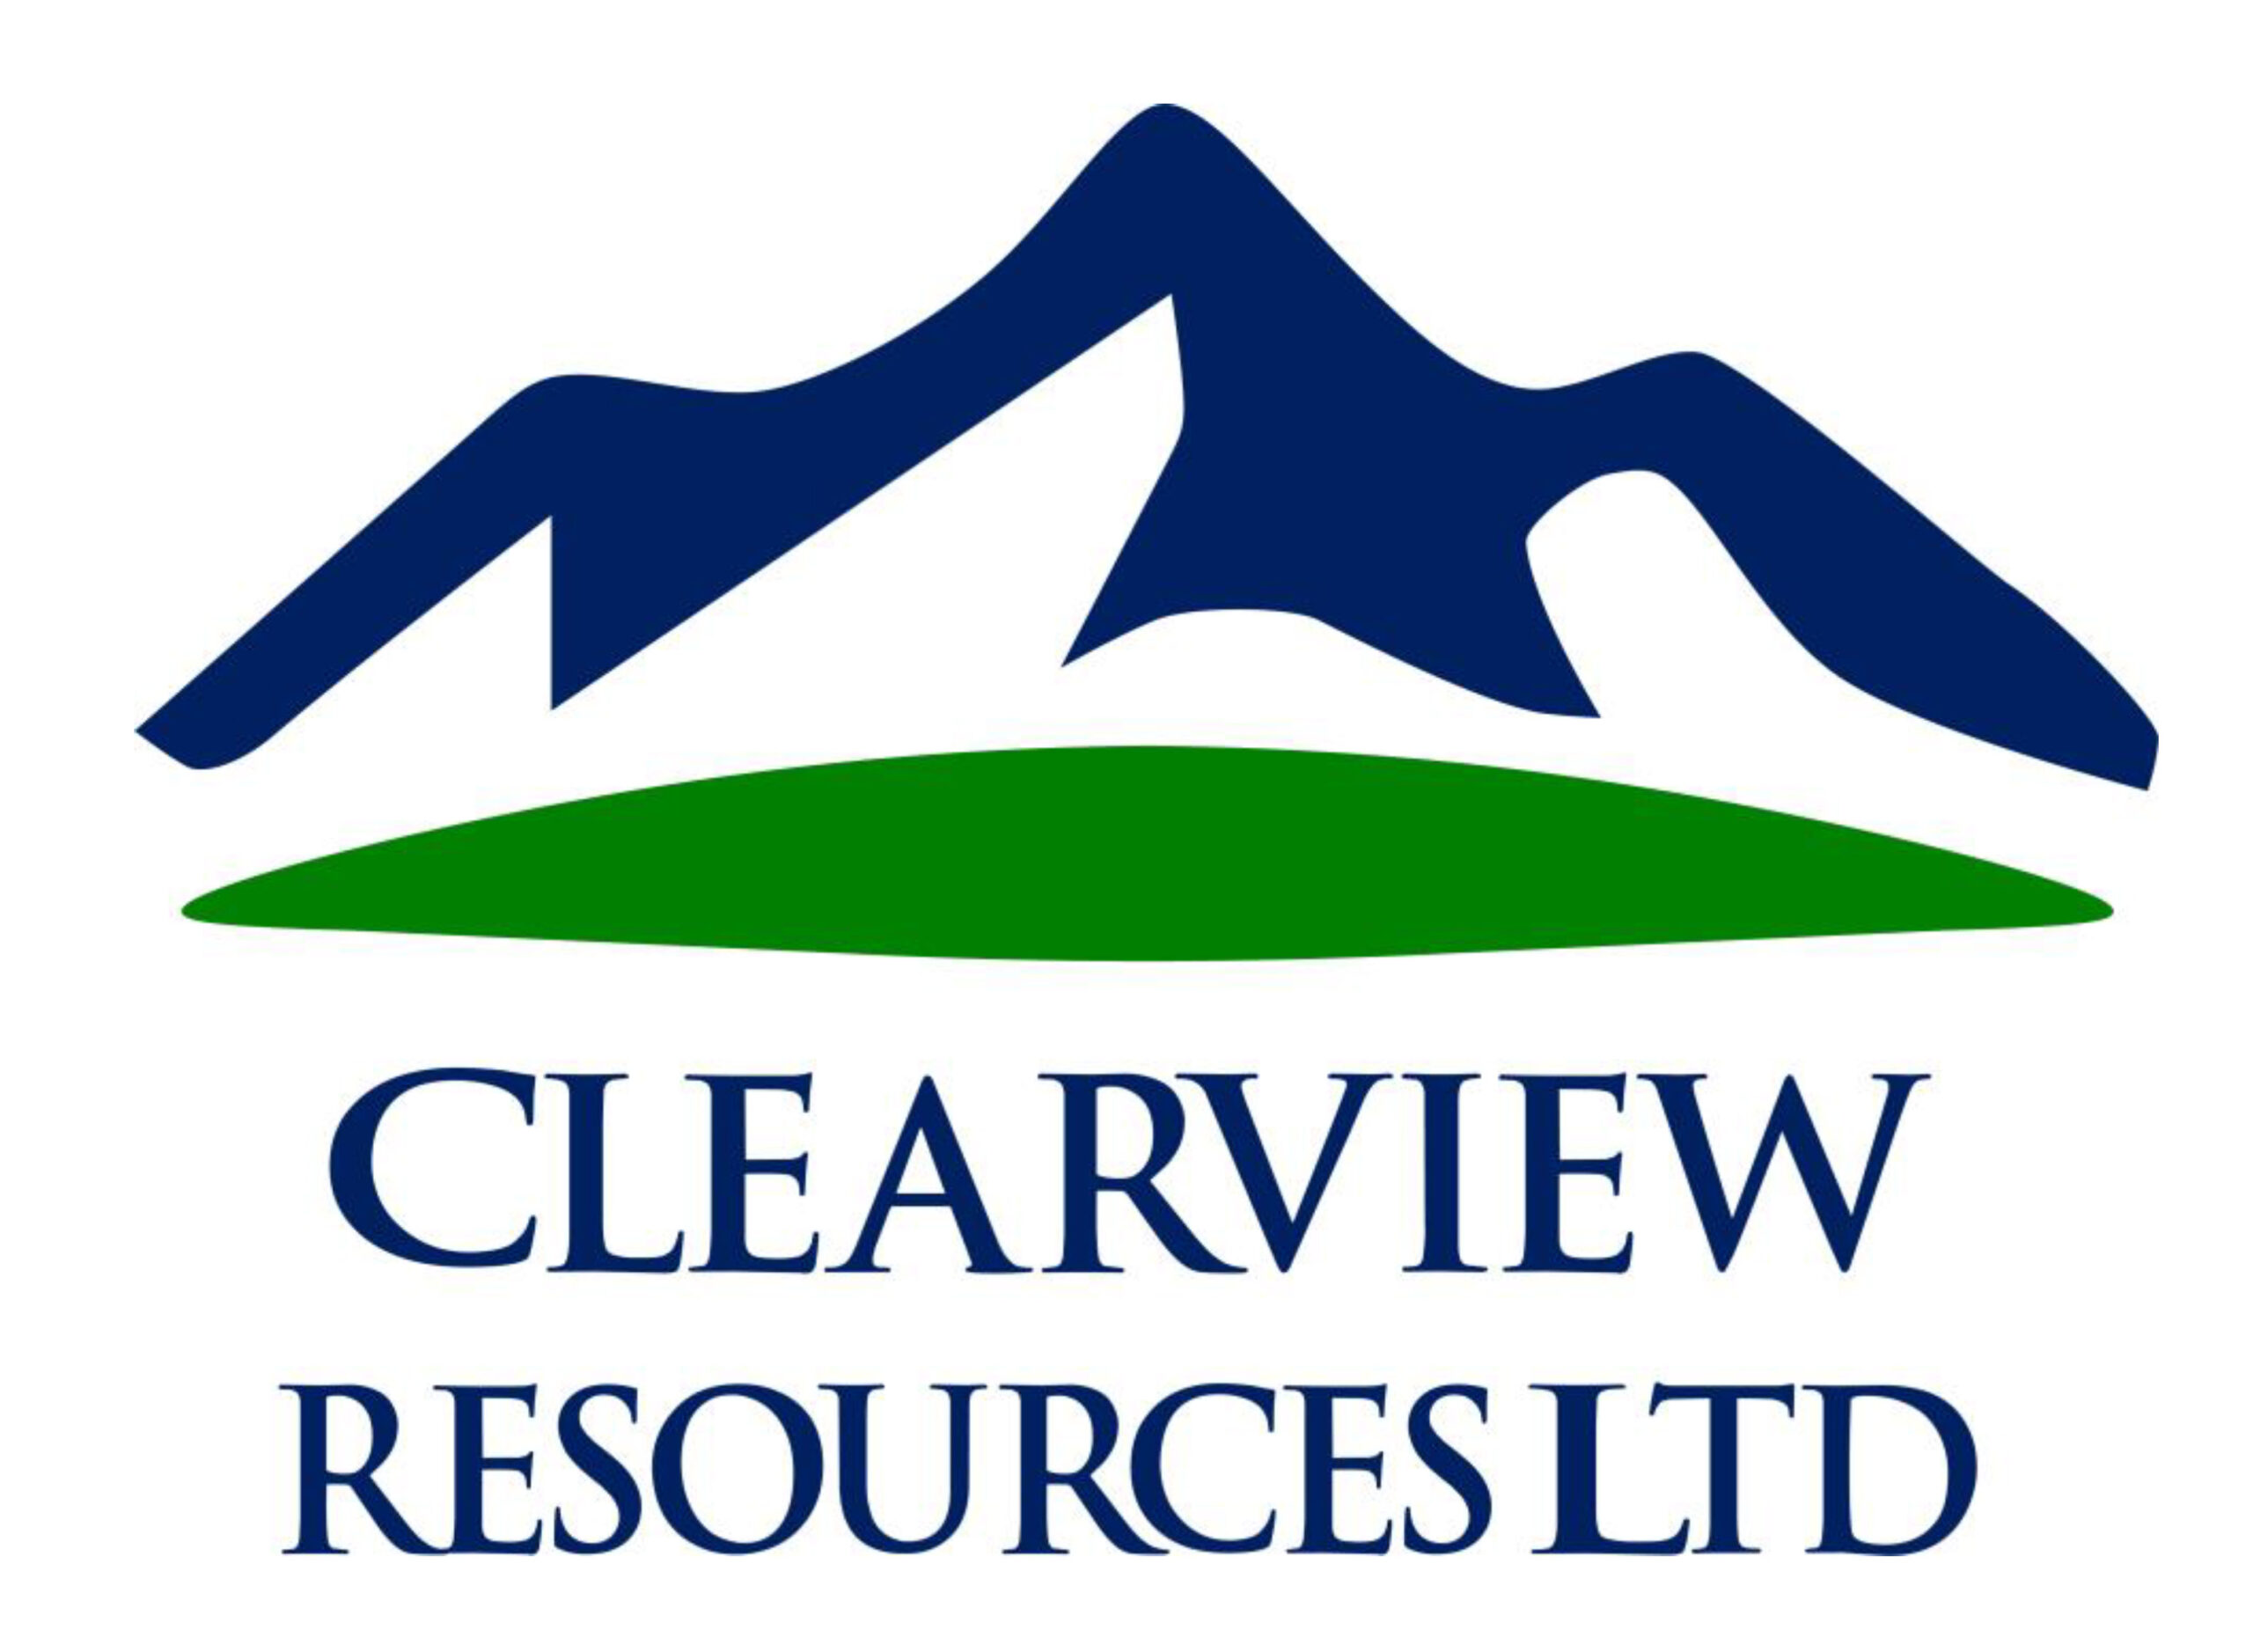 Clearview Resources Ltd